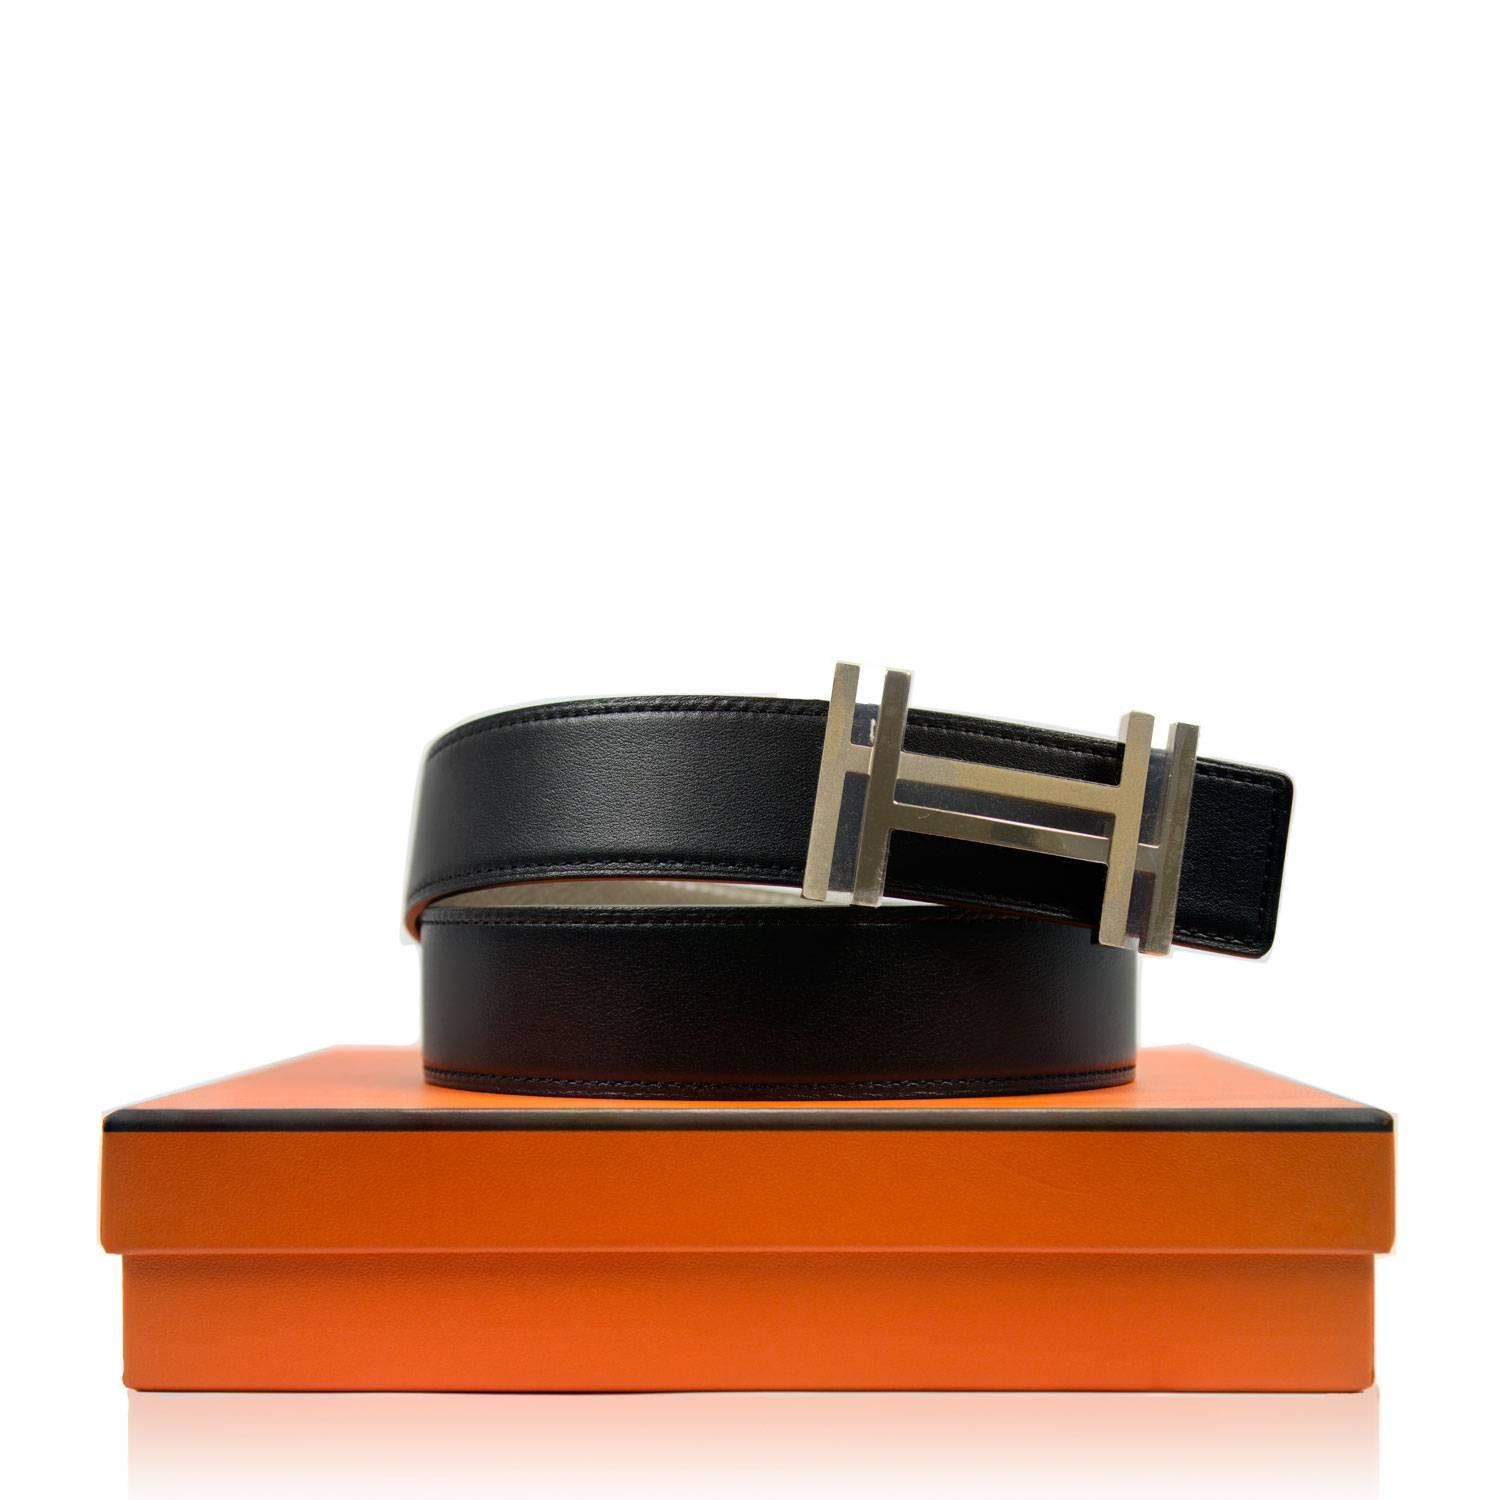 Hermes Belt Reversible 32mm/95cm Togo Leather Noir/Gold Color Double H Permabrass 2016.

Pre-owned and never used. 
Bought it in Hermes store in 2016. 
Size: 32mm/95cm. 
Color: Black/Etoupe. 
Model: Double H . 

Details: *Protective felt